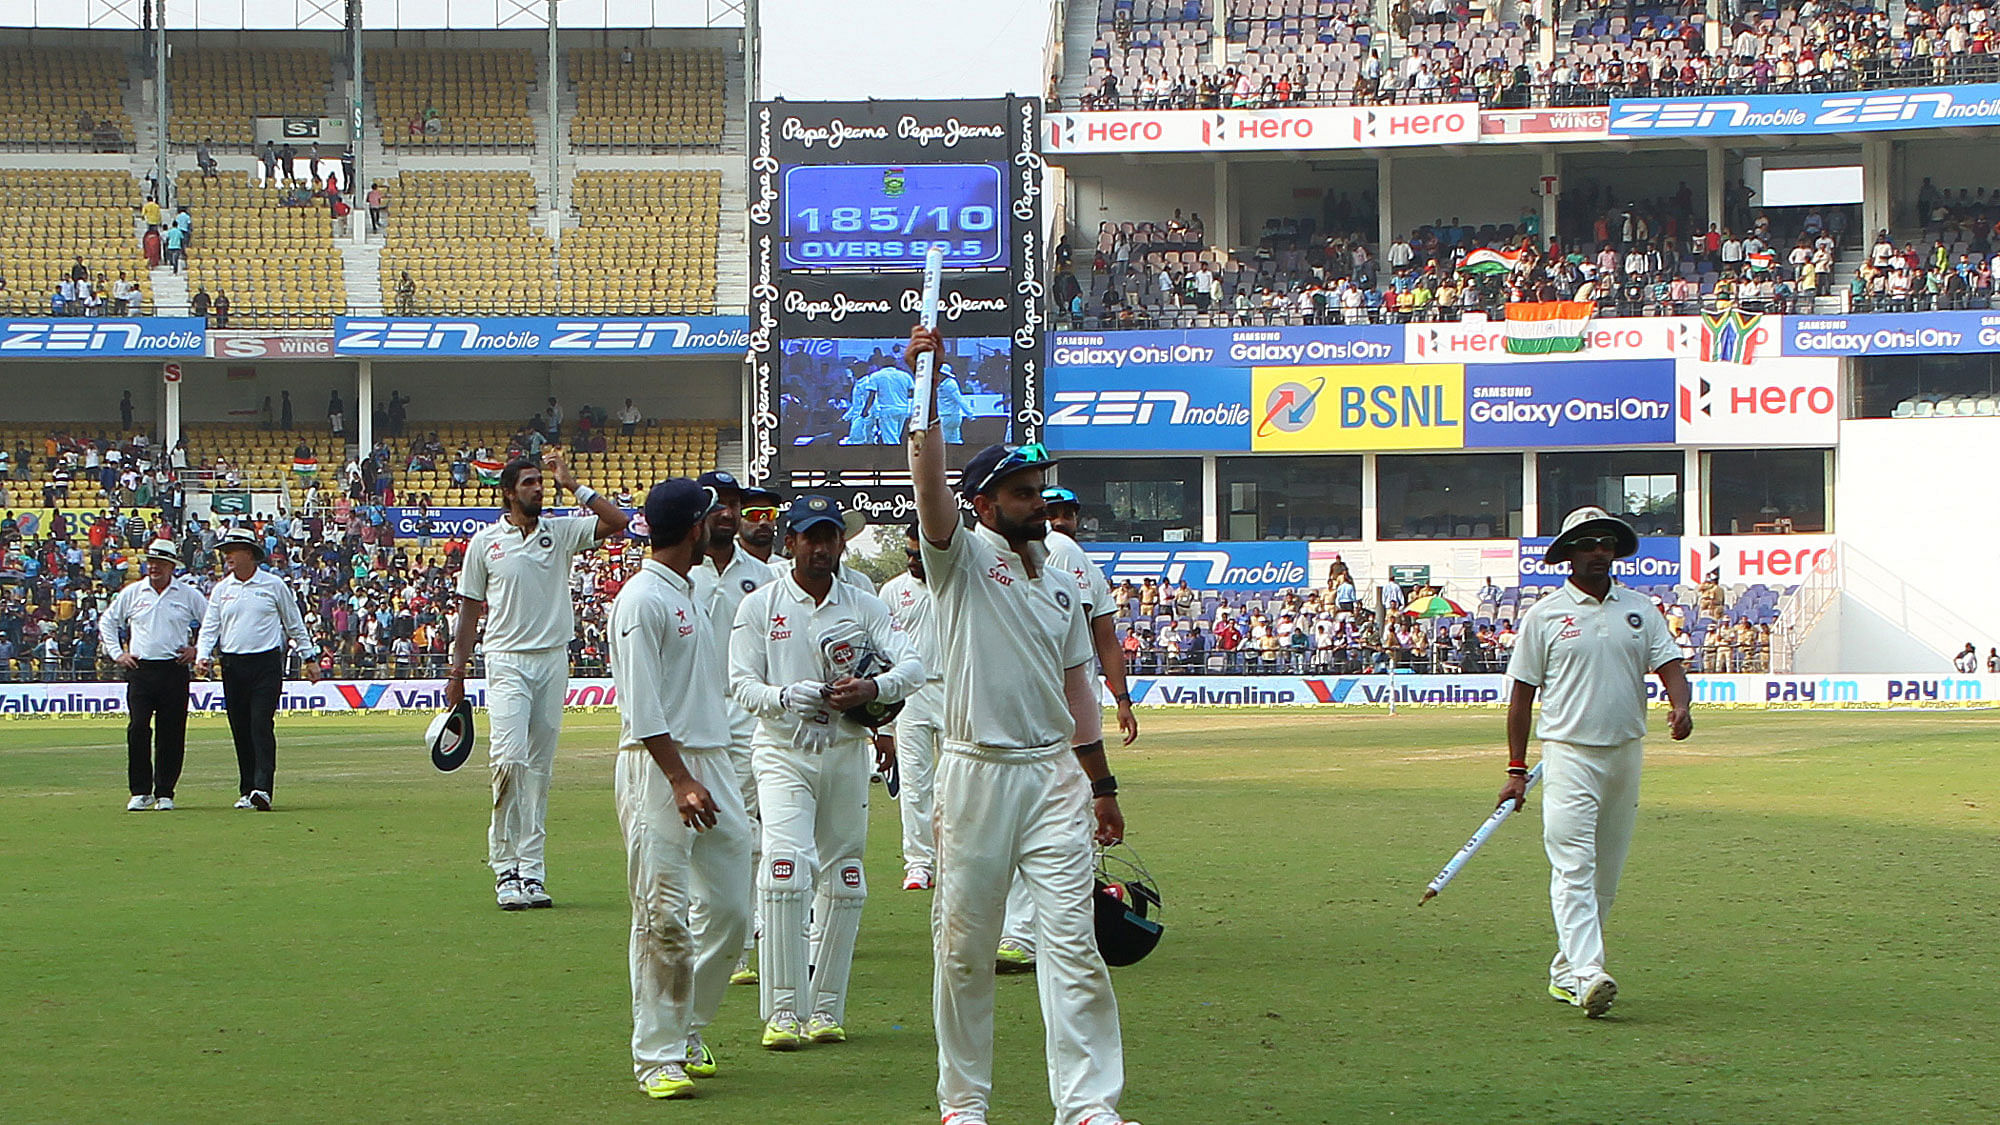 India win the third Test by 124 runs against S Africa. (Photo Courtesy: Ron Gaunt/BCCI/SPORTZPICS)